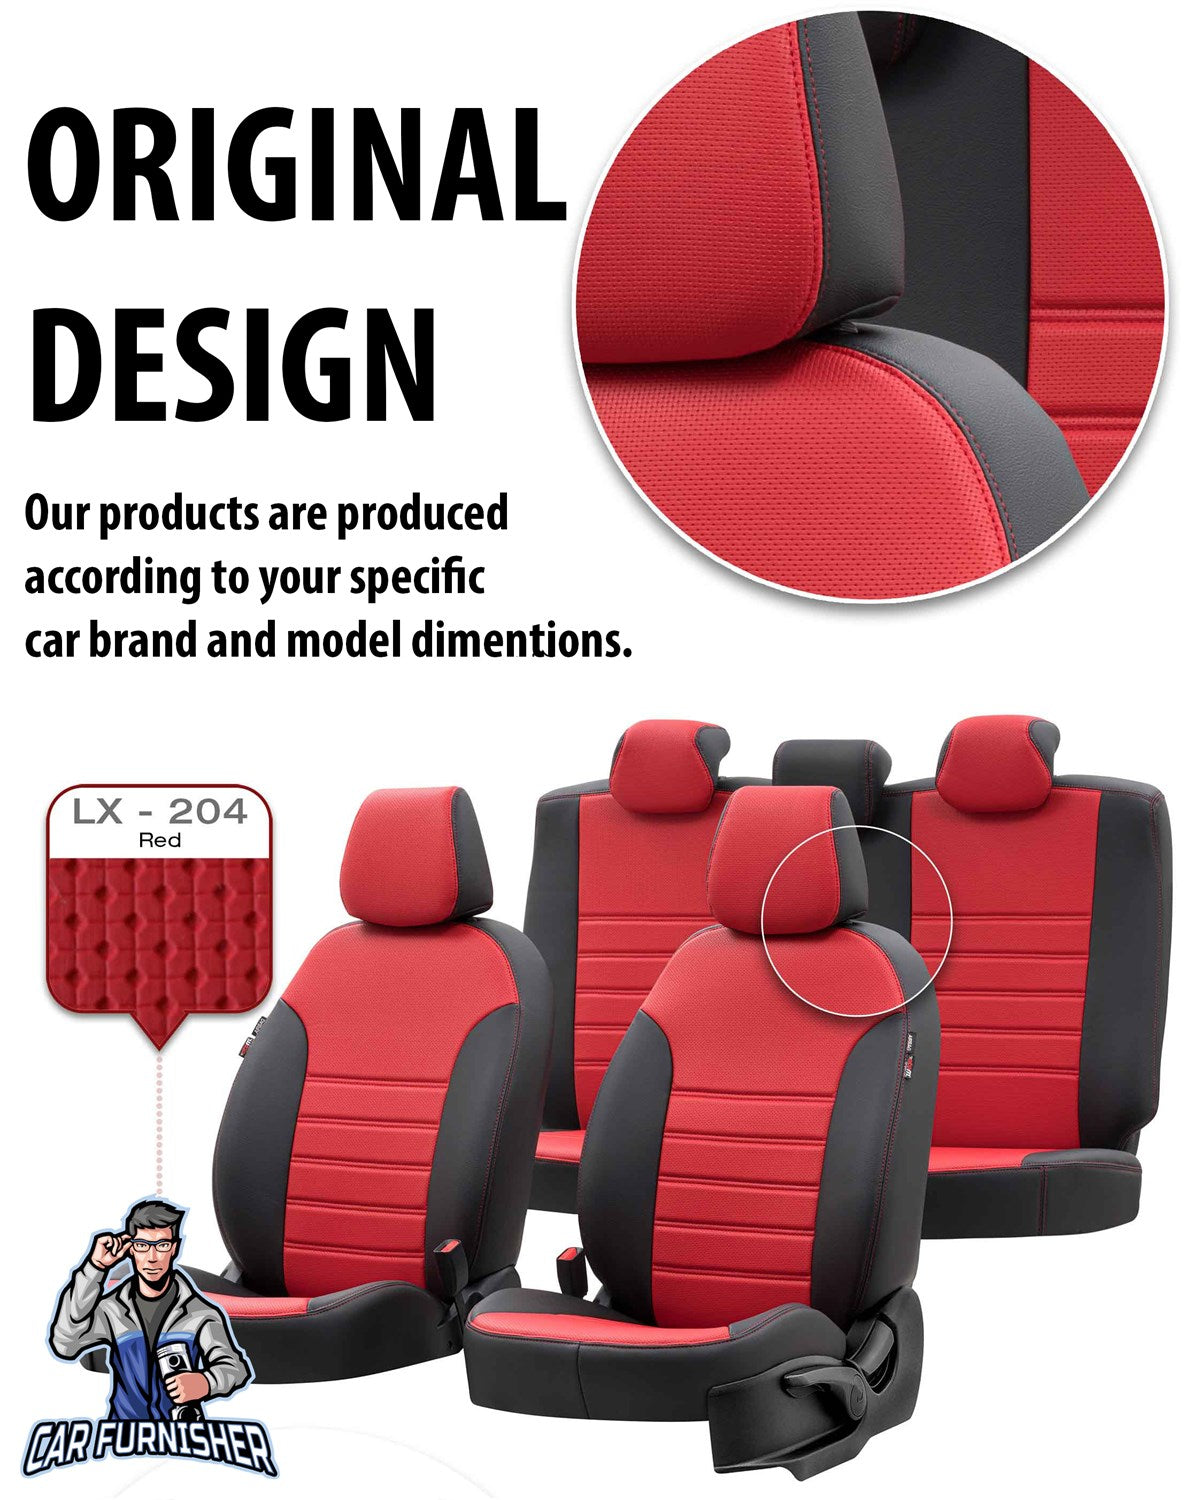 Skoda Roomstar Seat Cover New York Leather Design Smoked Leather